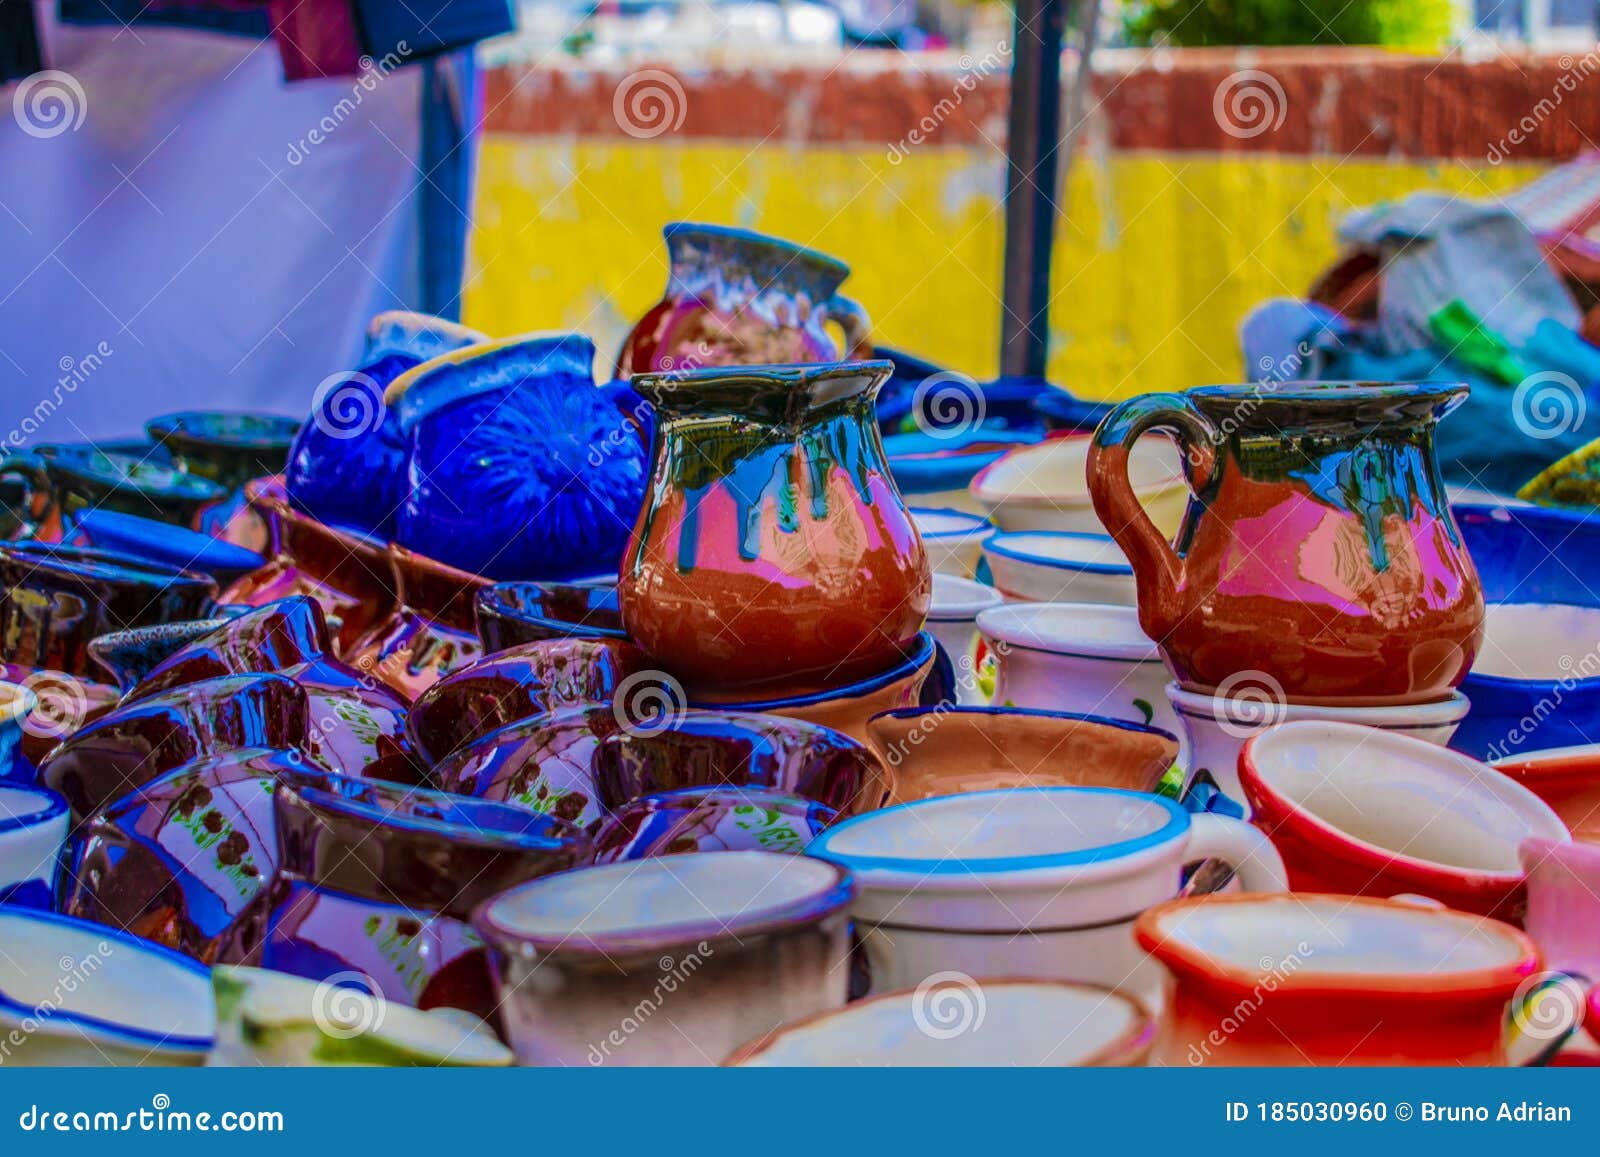 traditional mayan glasses, made of adobe and painted in different colors,